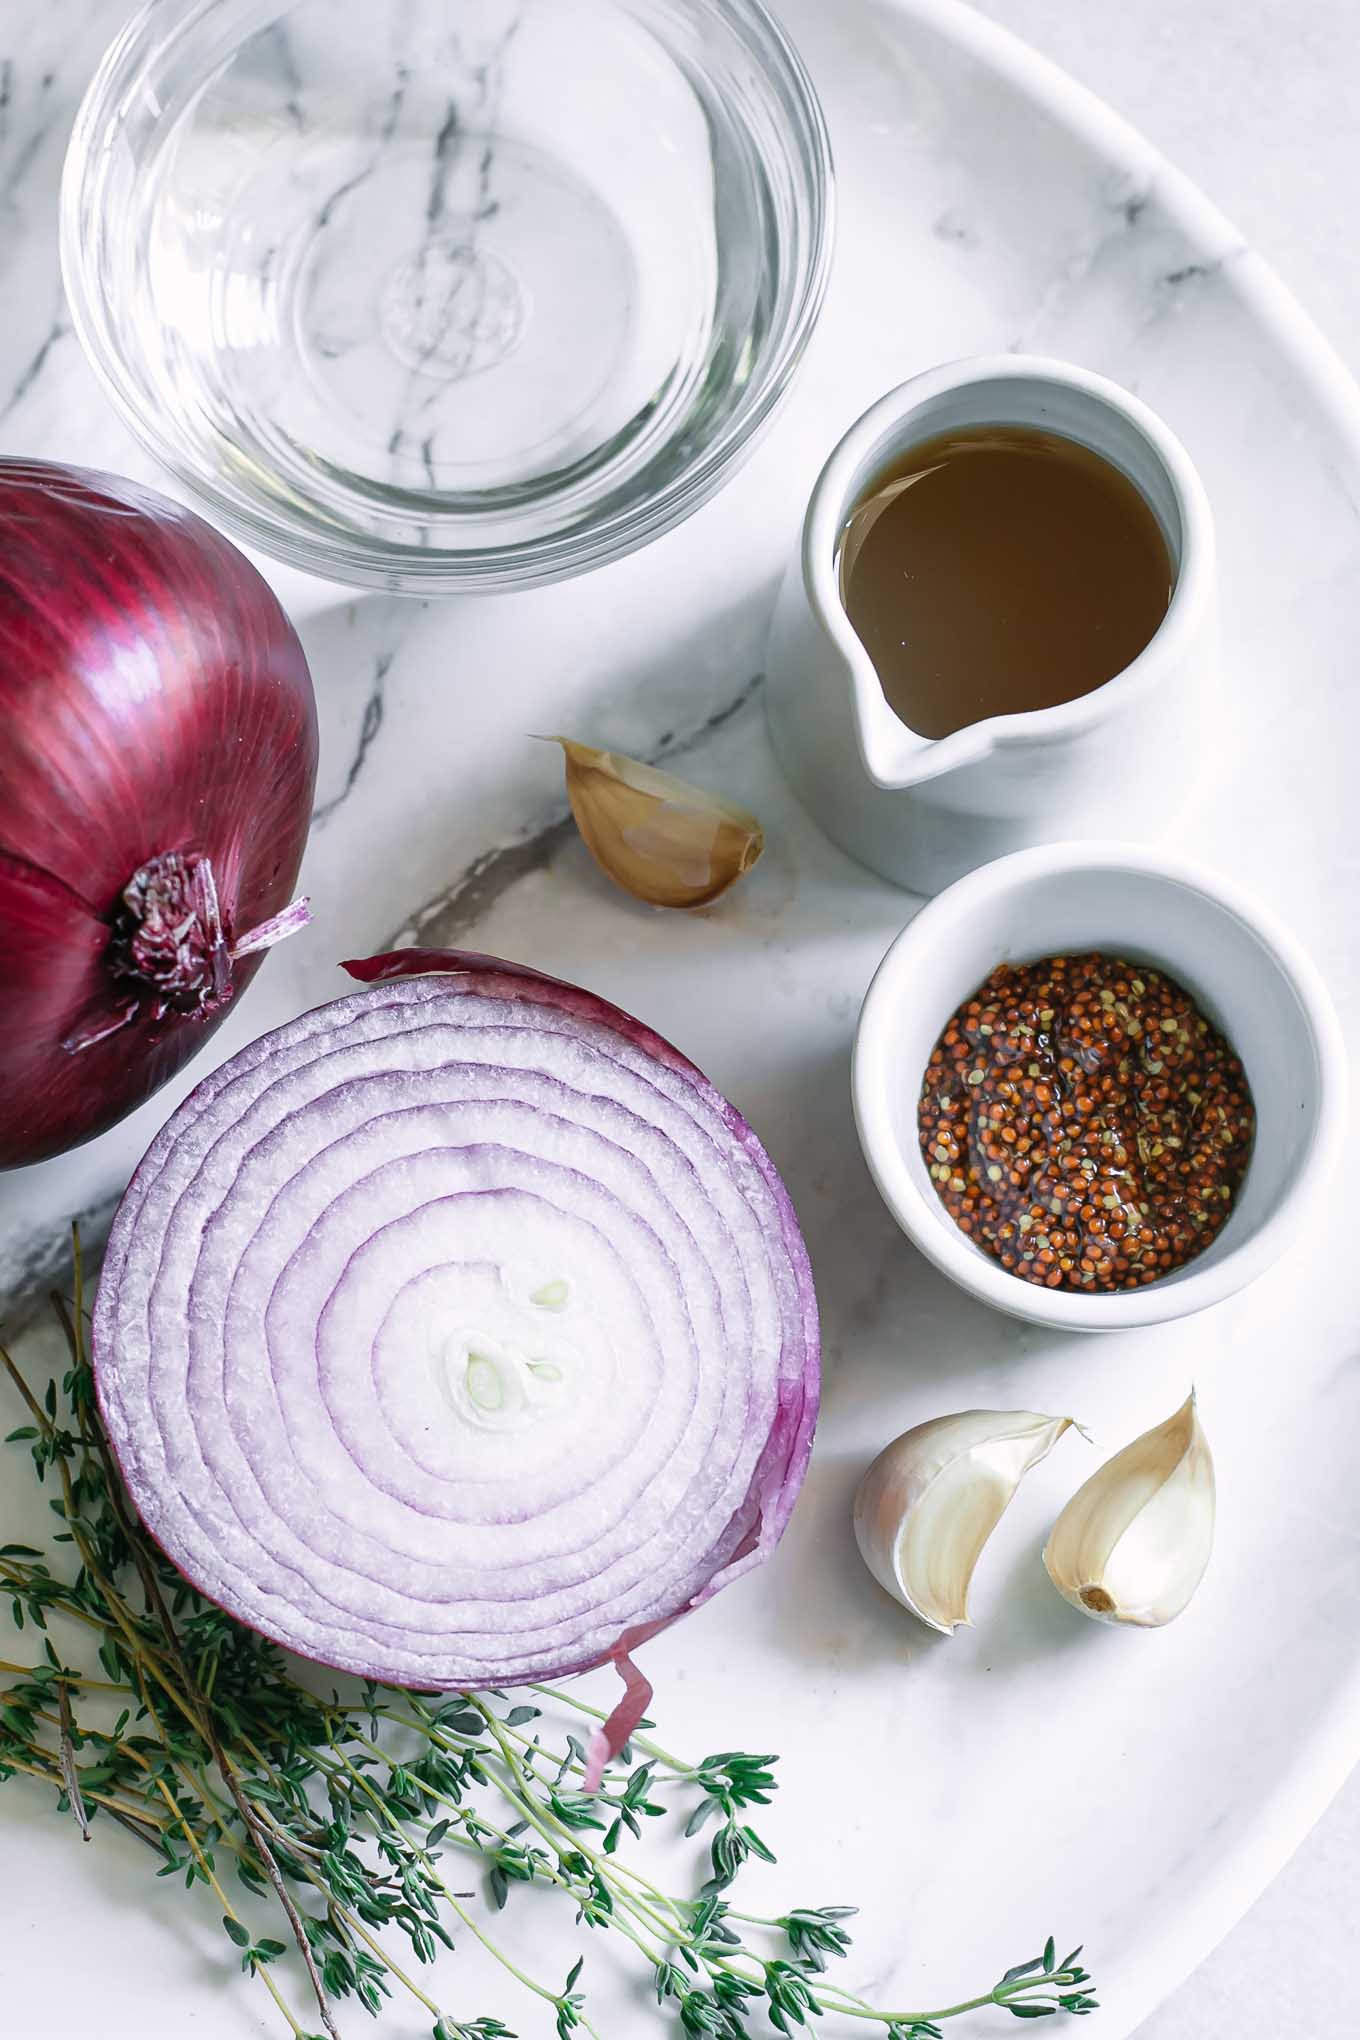 a plate containing red onions, water, oil, garlic, herbs and spices